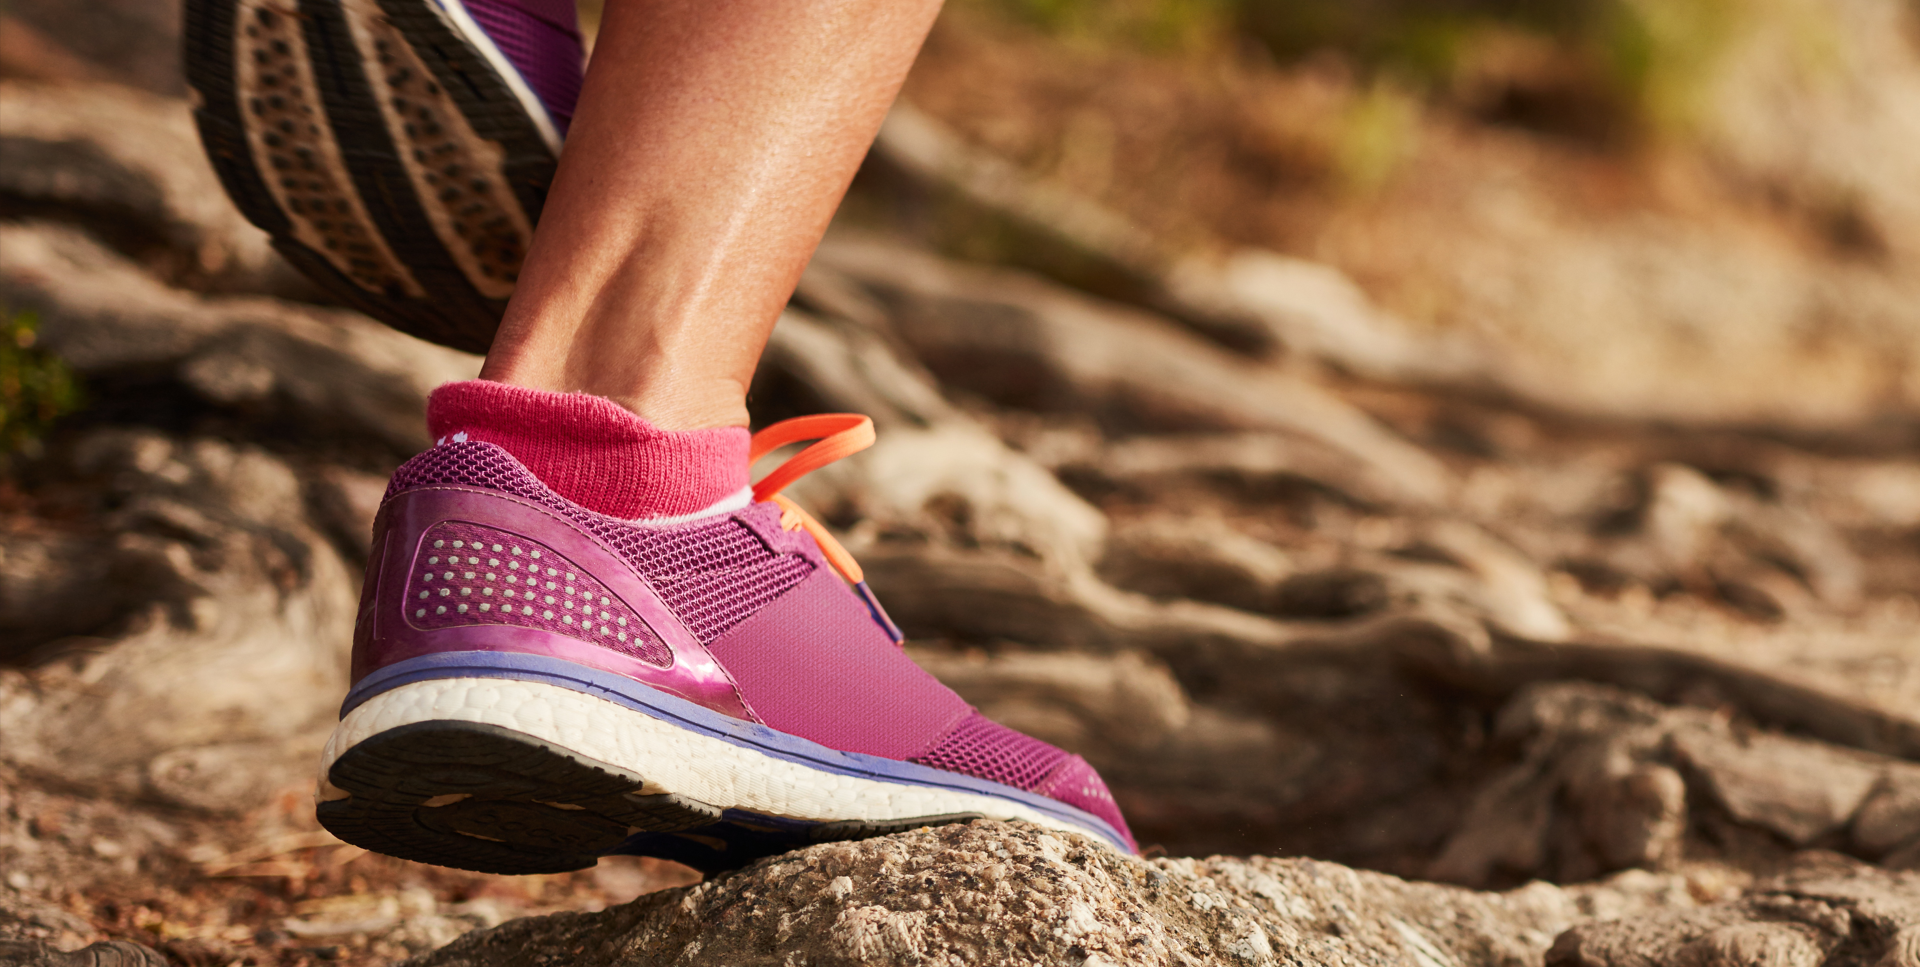 The 8 Best Running Shoes For Wide Feet To Get Back On Track